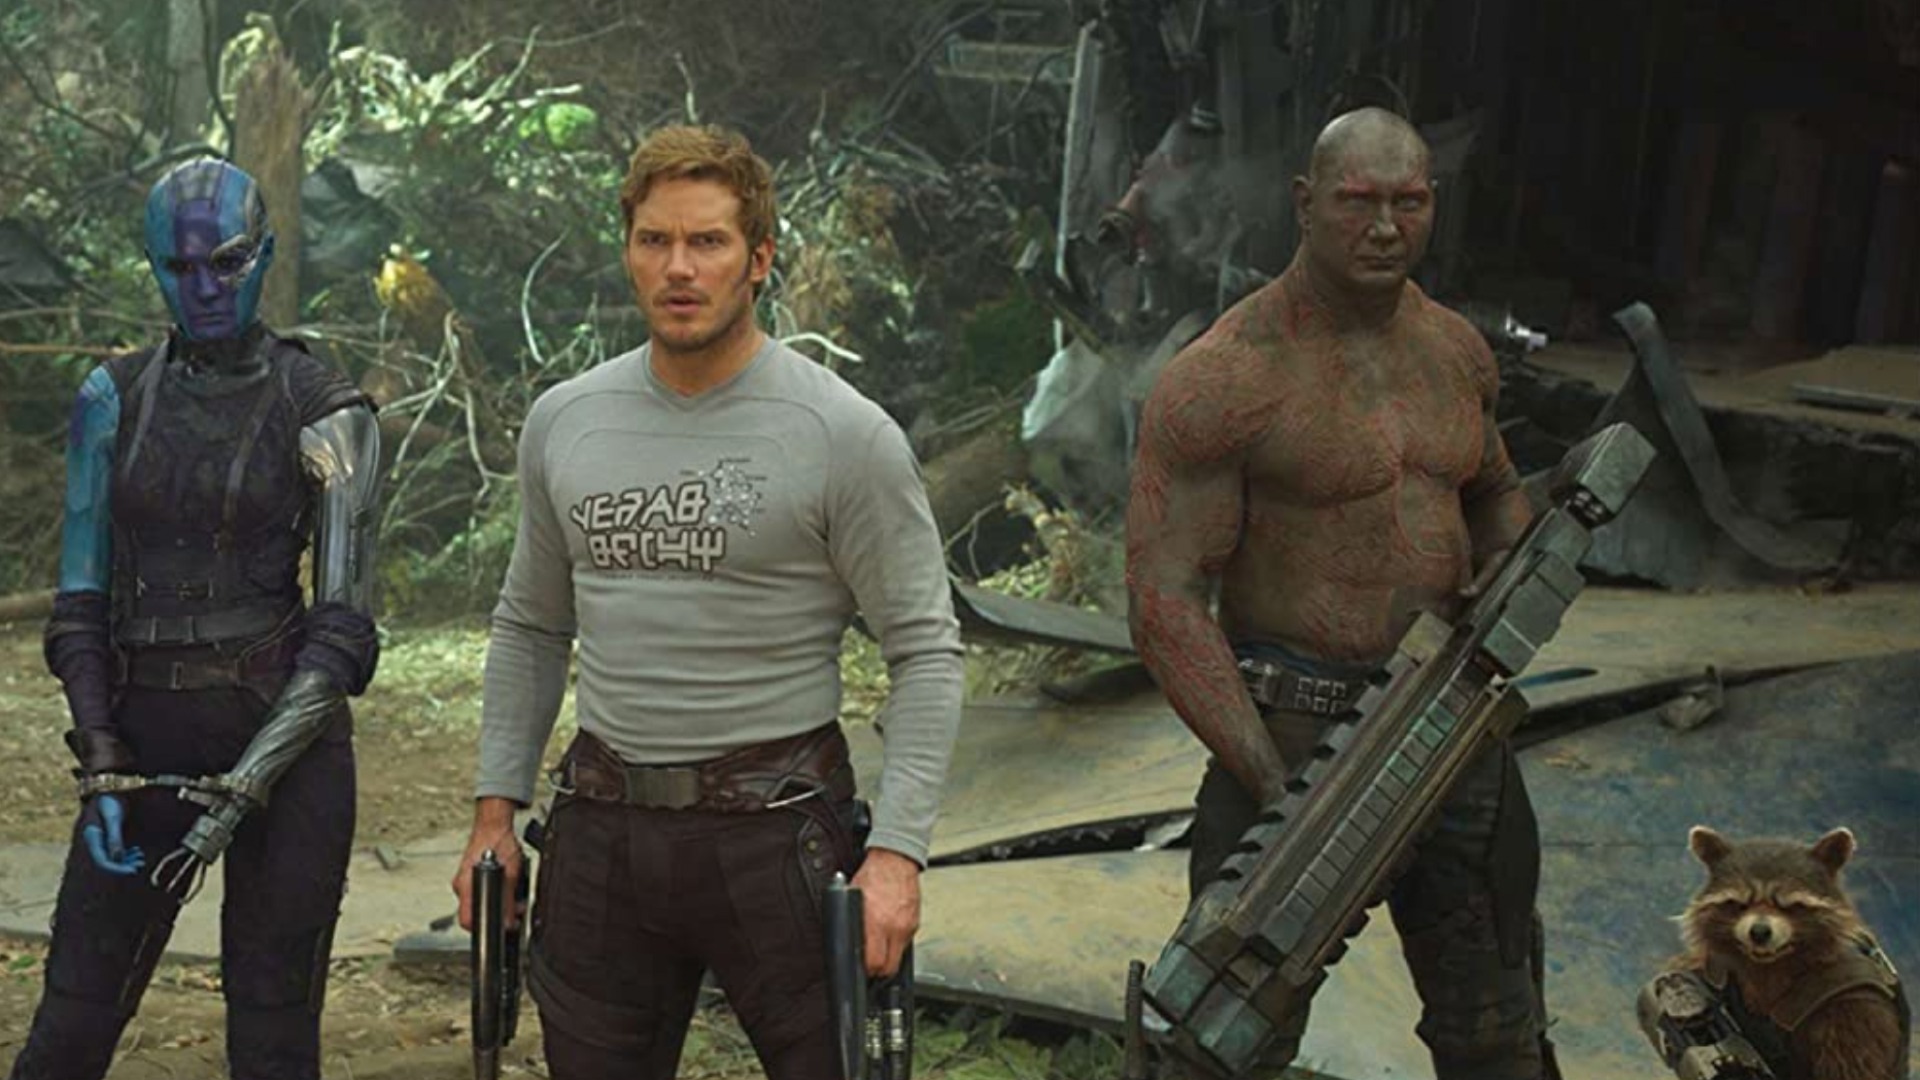 James Gunn explains how Guardians of the Galaxy Holiday Special bridges the gap to Vol. 3